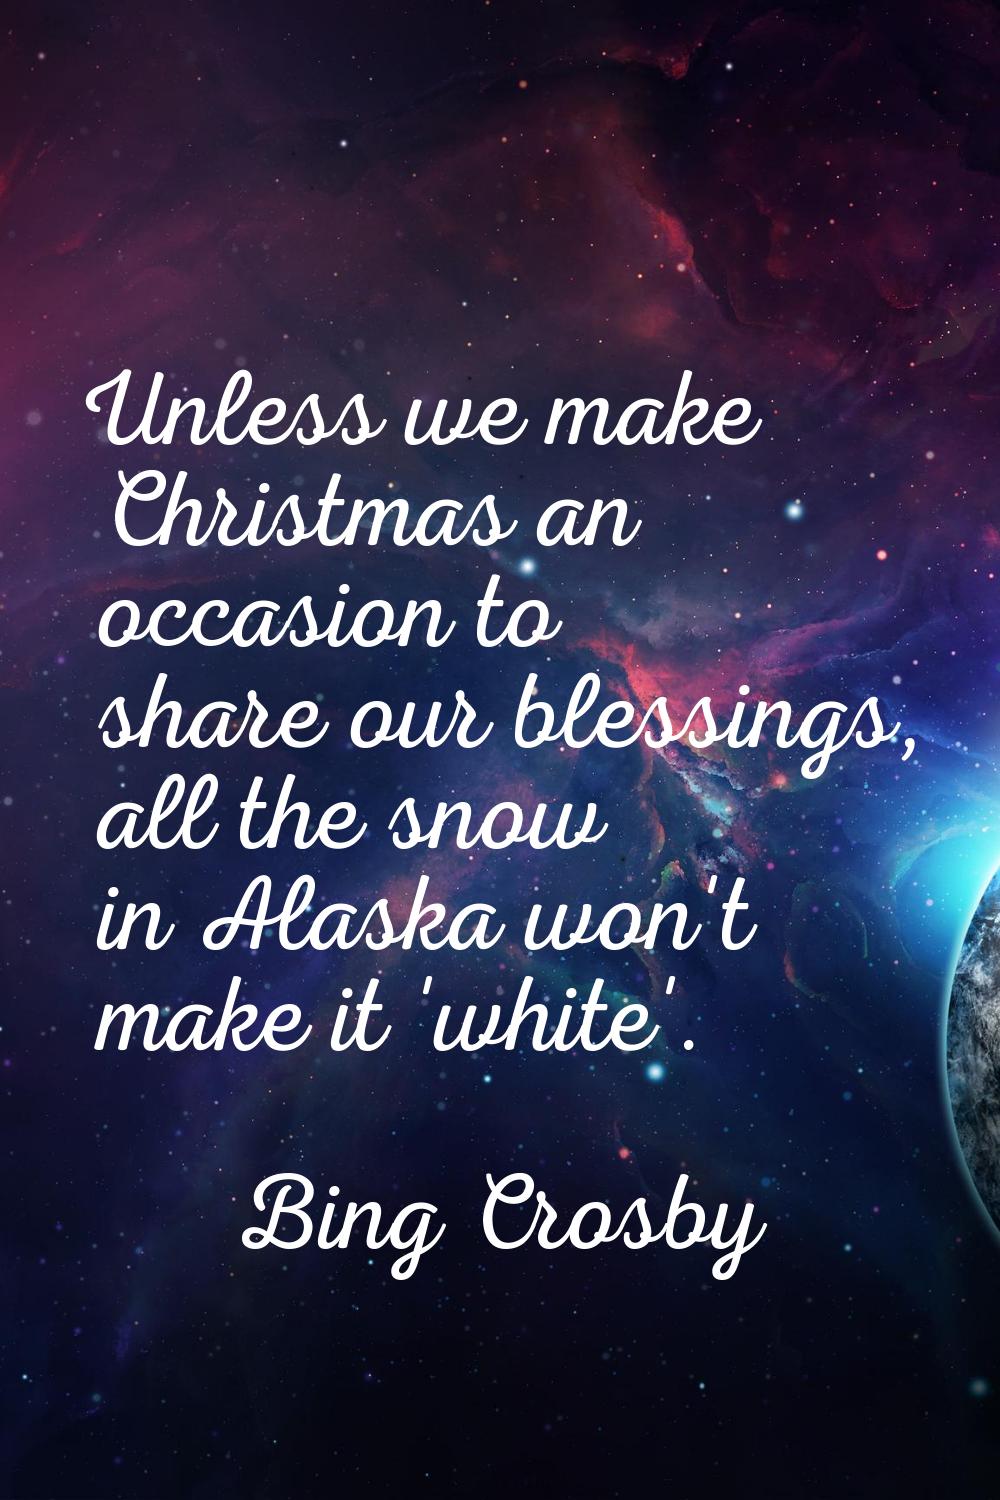 Unless we make Christmas an occasion to share our blessings, all the snow in Alaska won't make it '